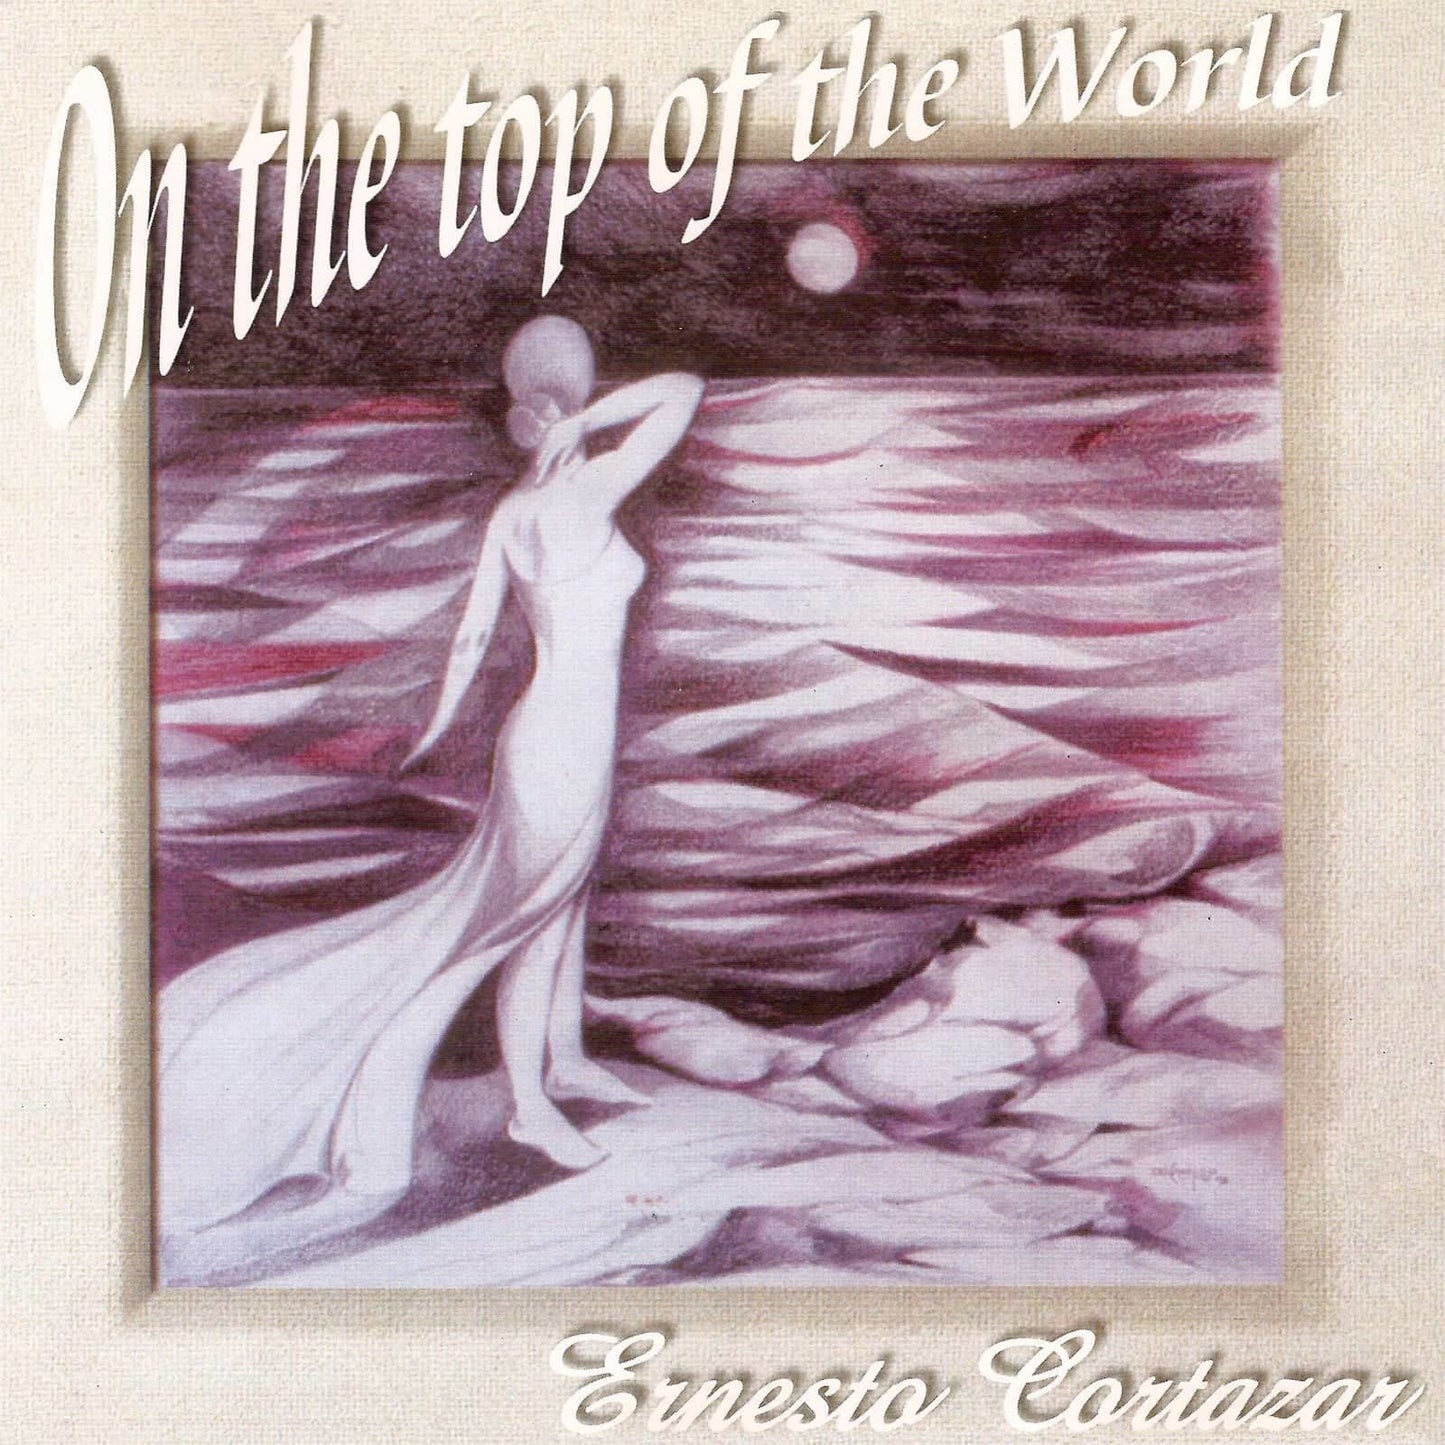 On The Top Of The World MP3 Album Composed by Ernesto Cortazar